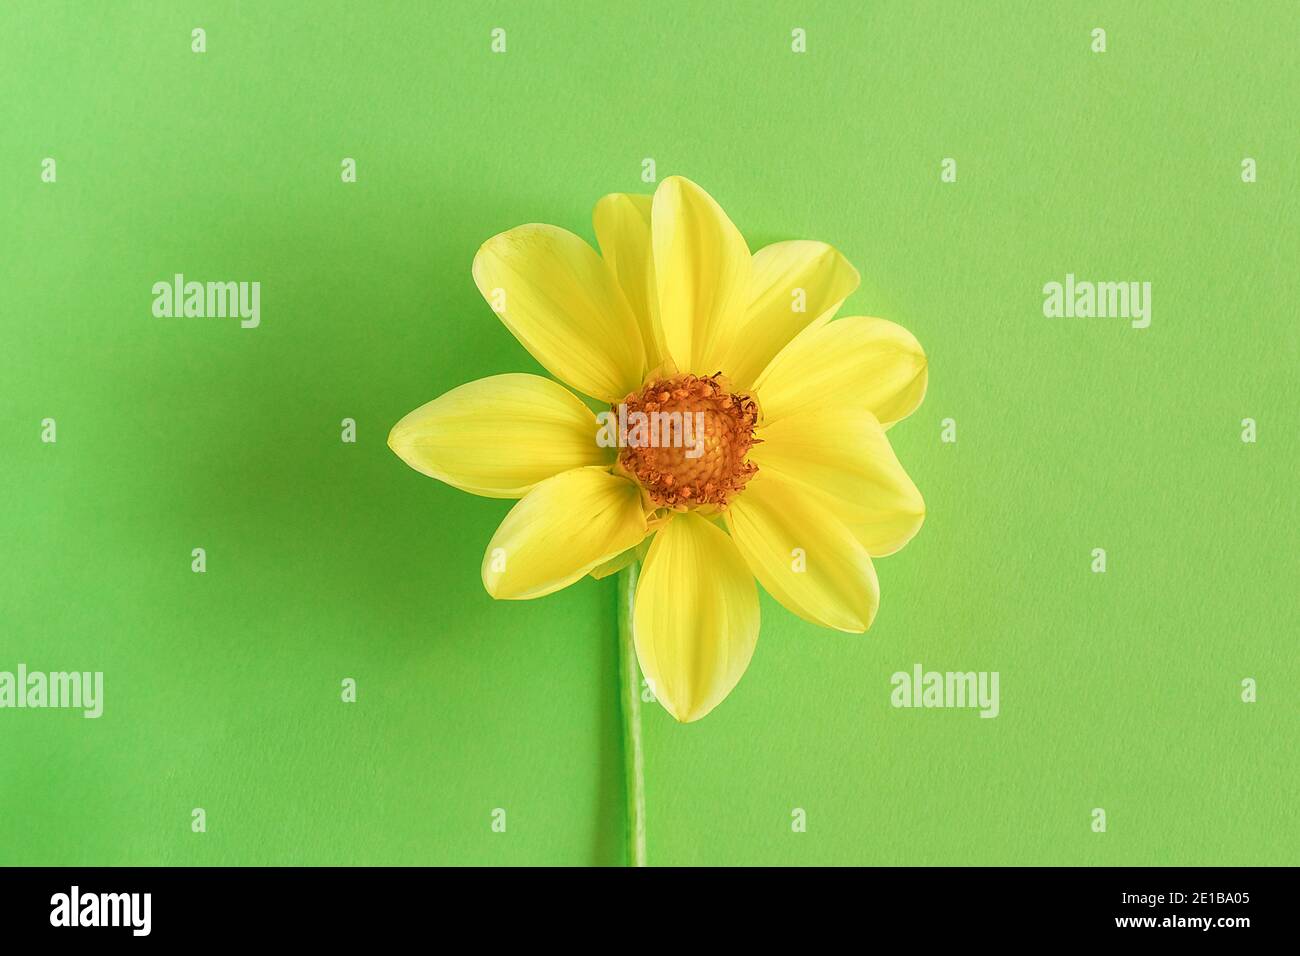 One fresh natural yellow flower on green background, close-up. Concept Hello spring, springtime. Top view Creative Flat lay Copy space Template for yo Stock Photo